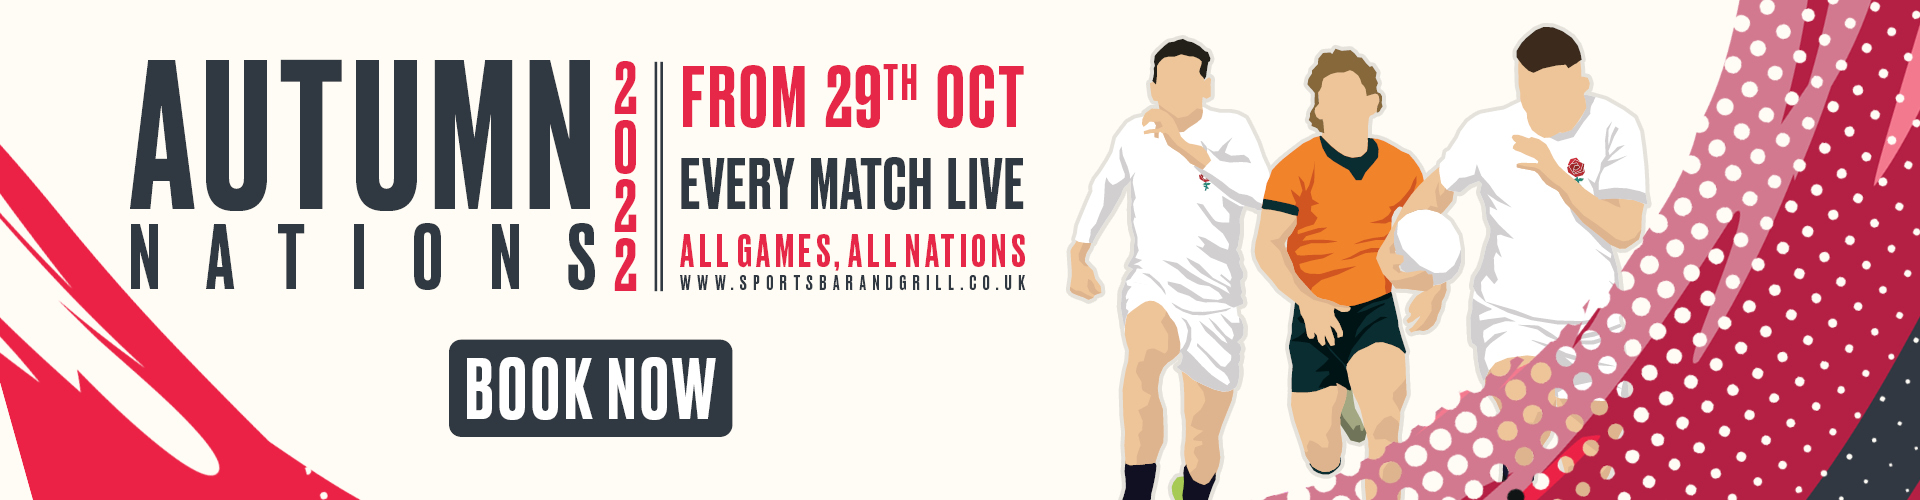 Autumn Nations 2022 From 29th Oct - Every Match Live - All Games, All Nations